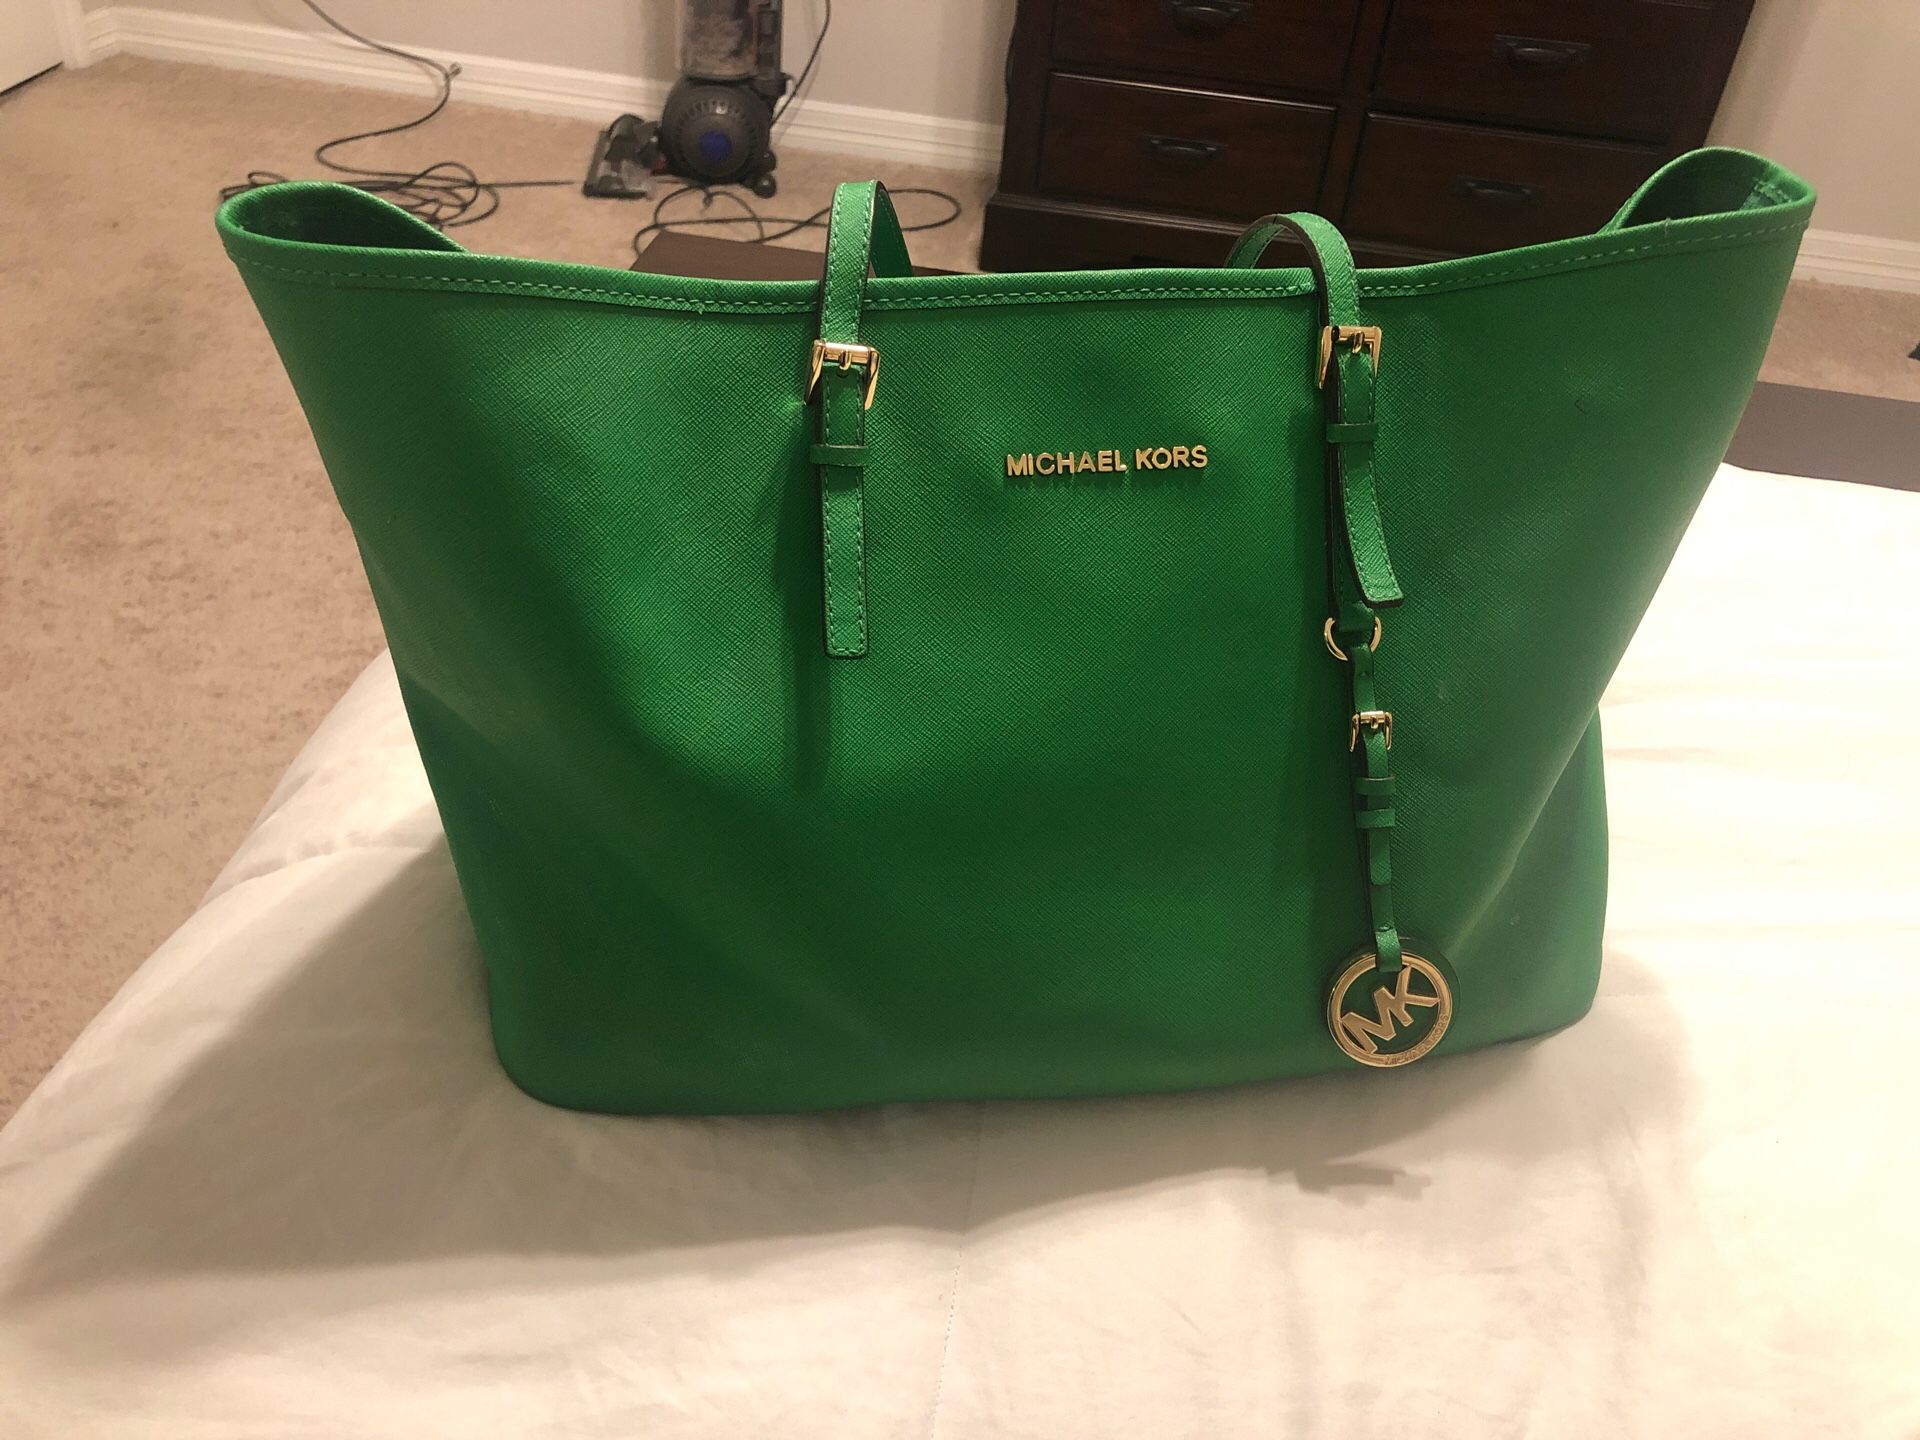 Authentic Micheal Kors tote bag